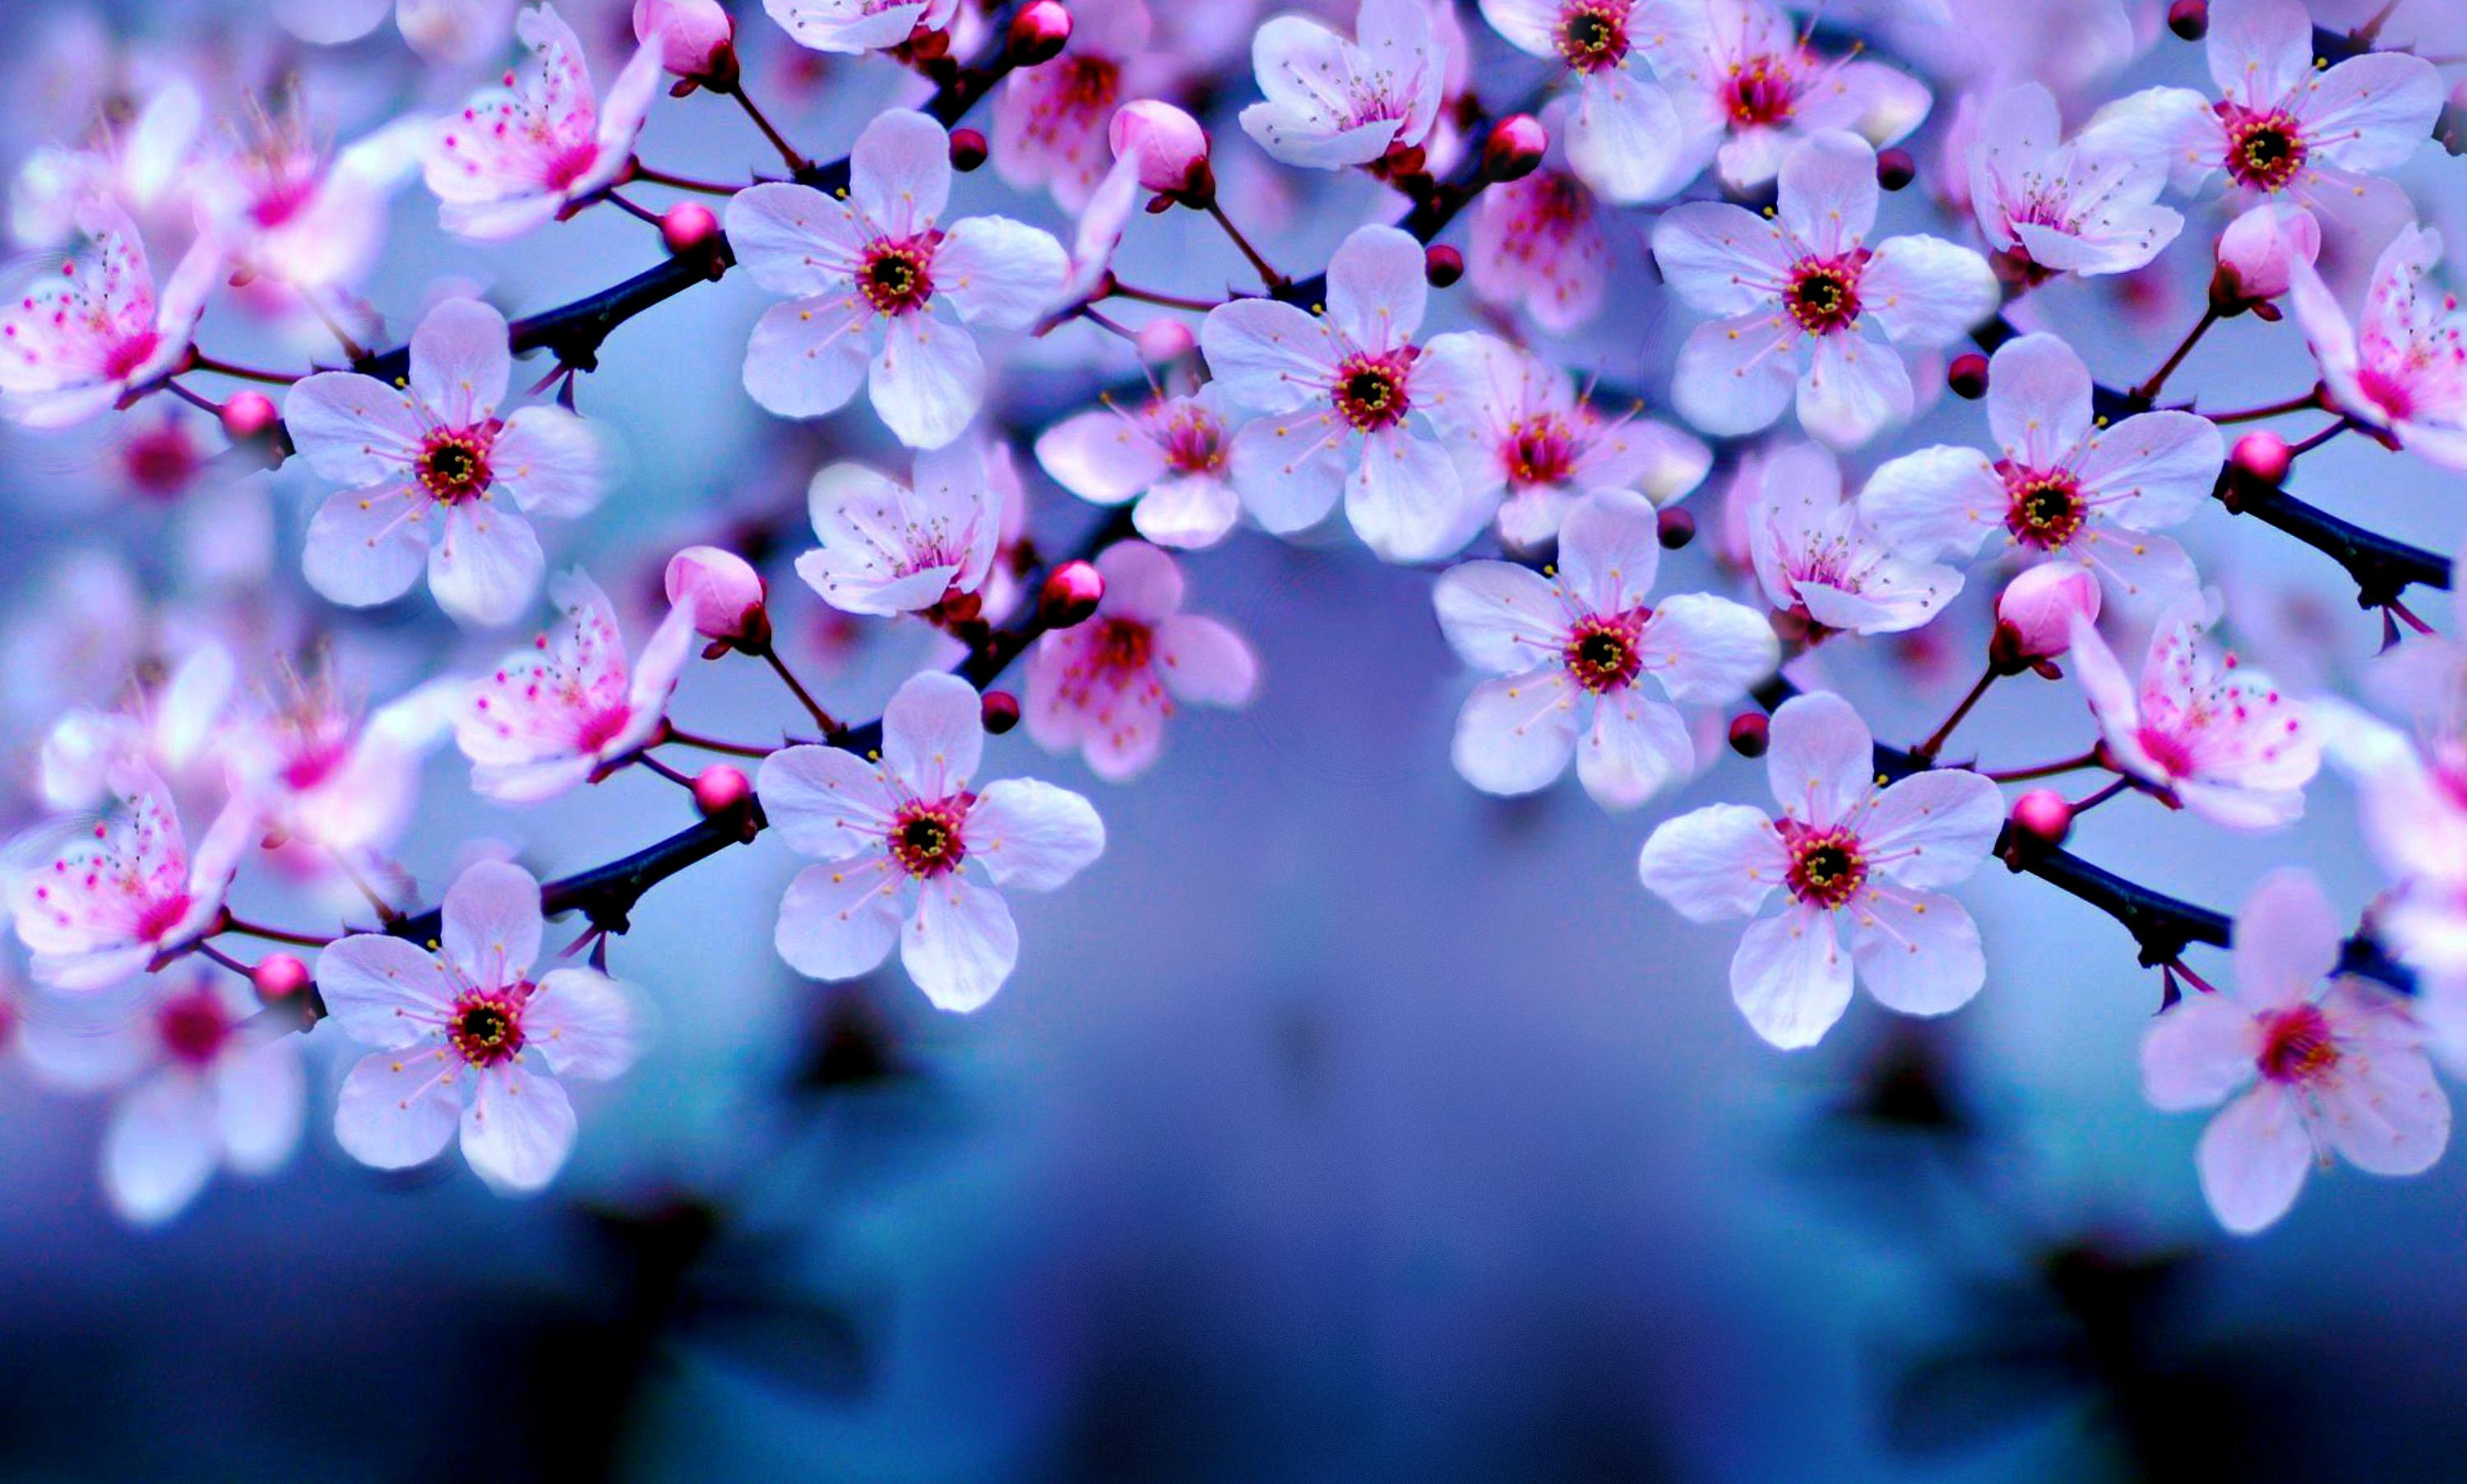 Cherry Blossom 4k, HD Flowers, 4k Wallpapers, Images, Backgrounds ...